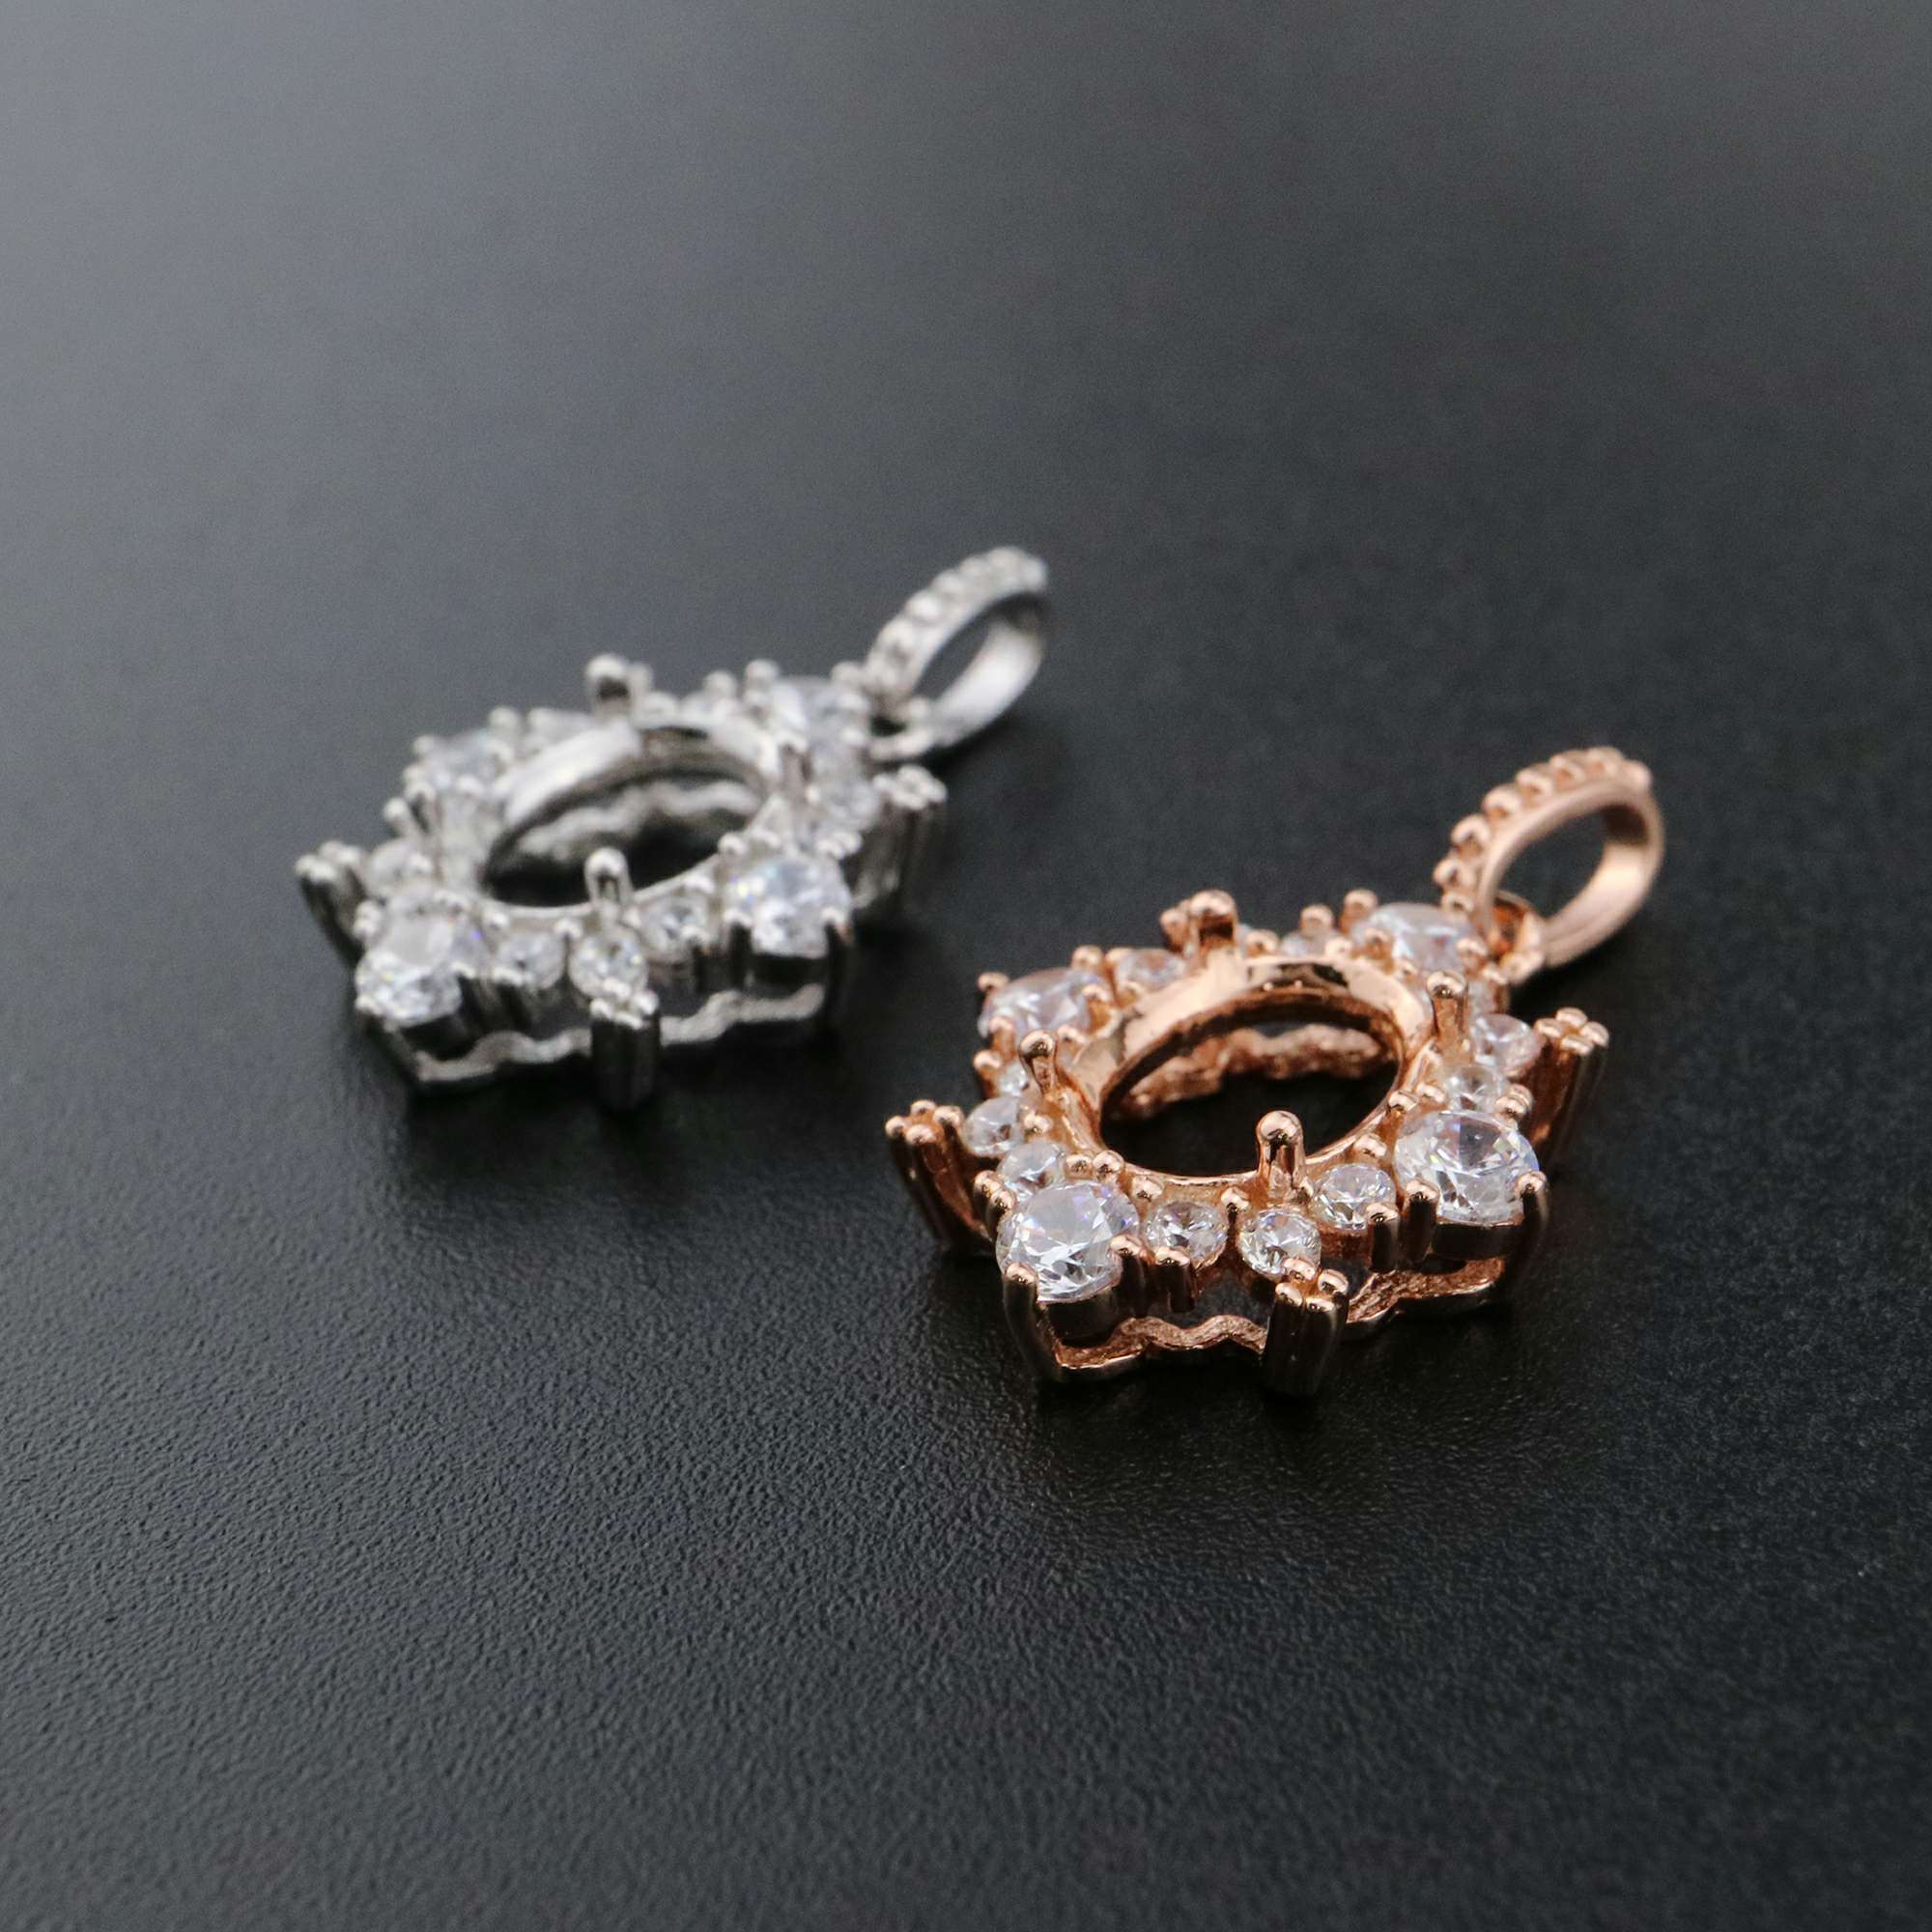 1Pcs Oval Prong Pendant Settings Snow Flake Rose Gold Plated Solid 925 Sterling Silver Filigree Gemstone Charm Bezel Tray DIY Supplies 1421132 - Click Image to Close